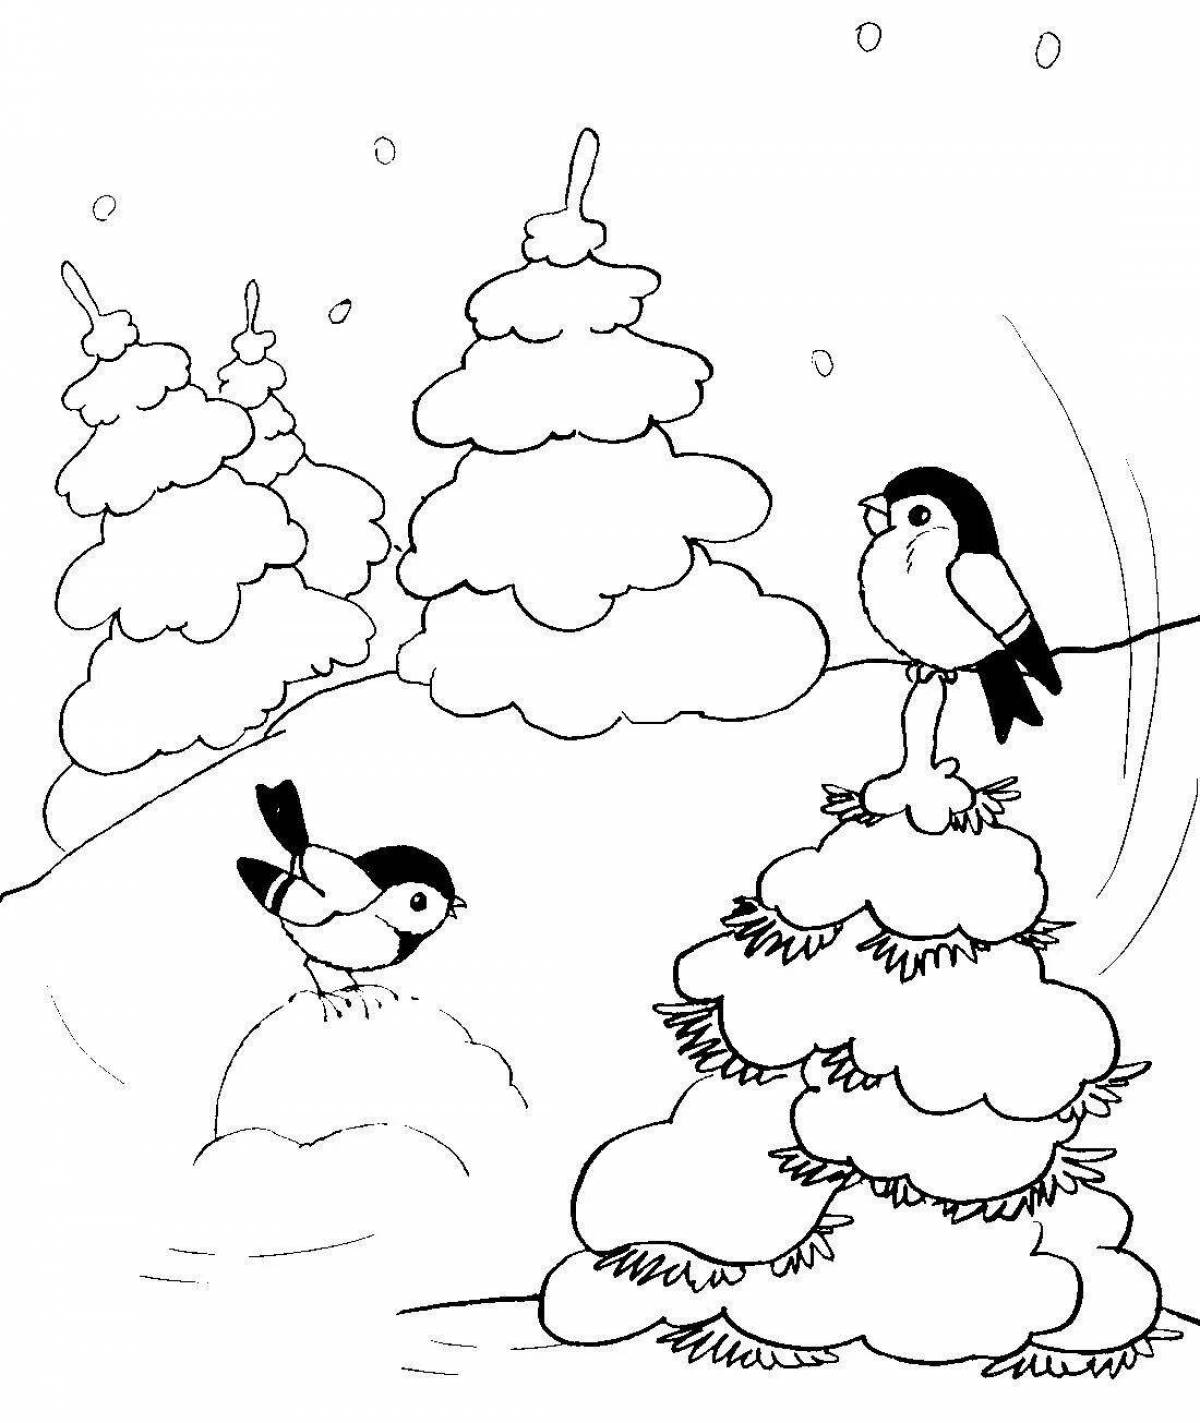 Funny drawing of a winter landscape for children